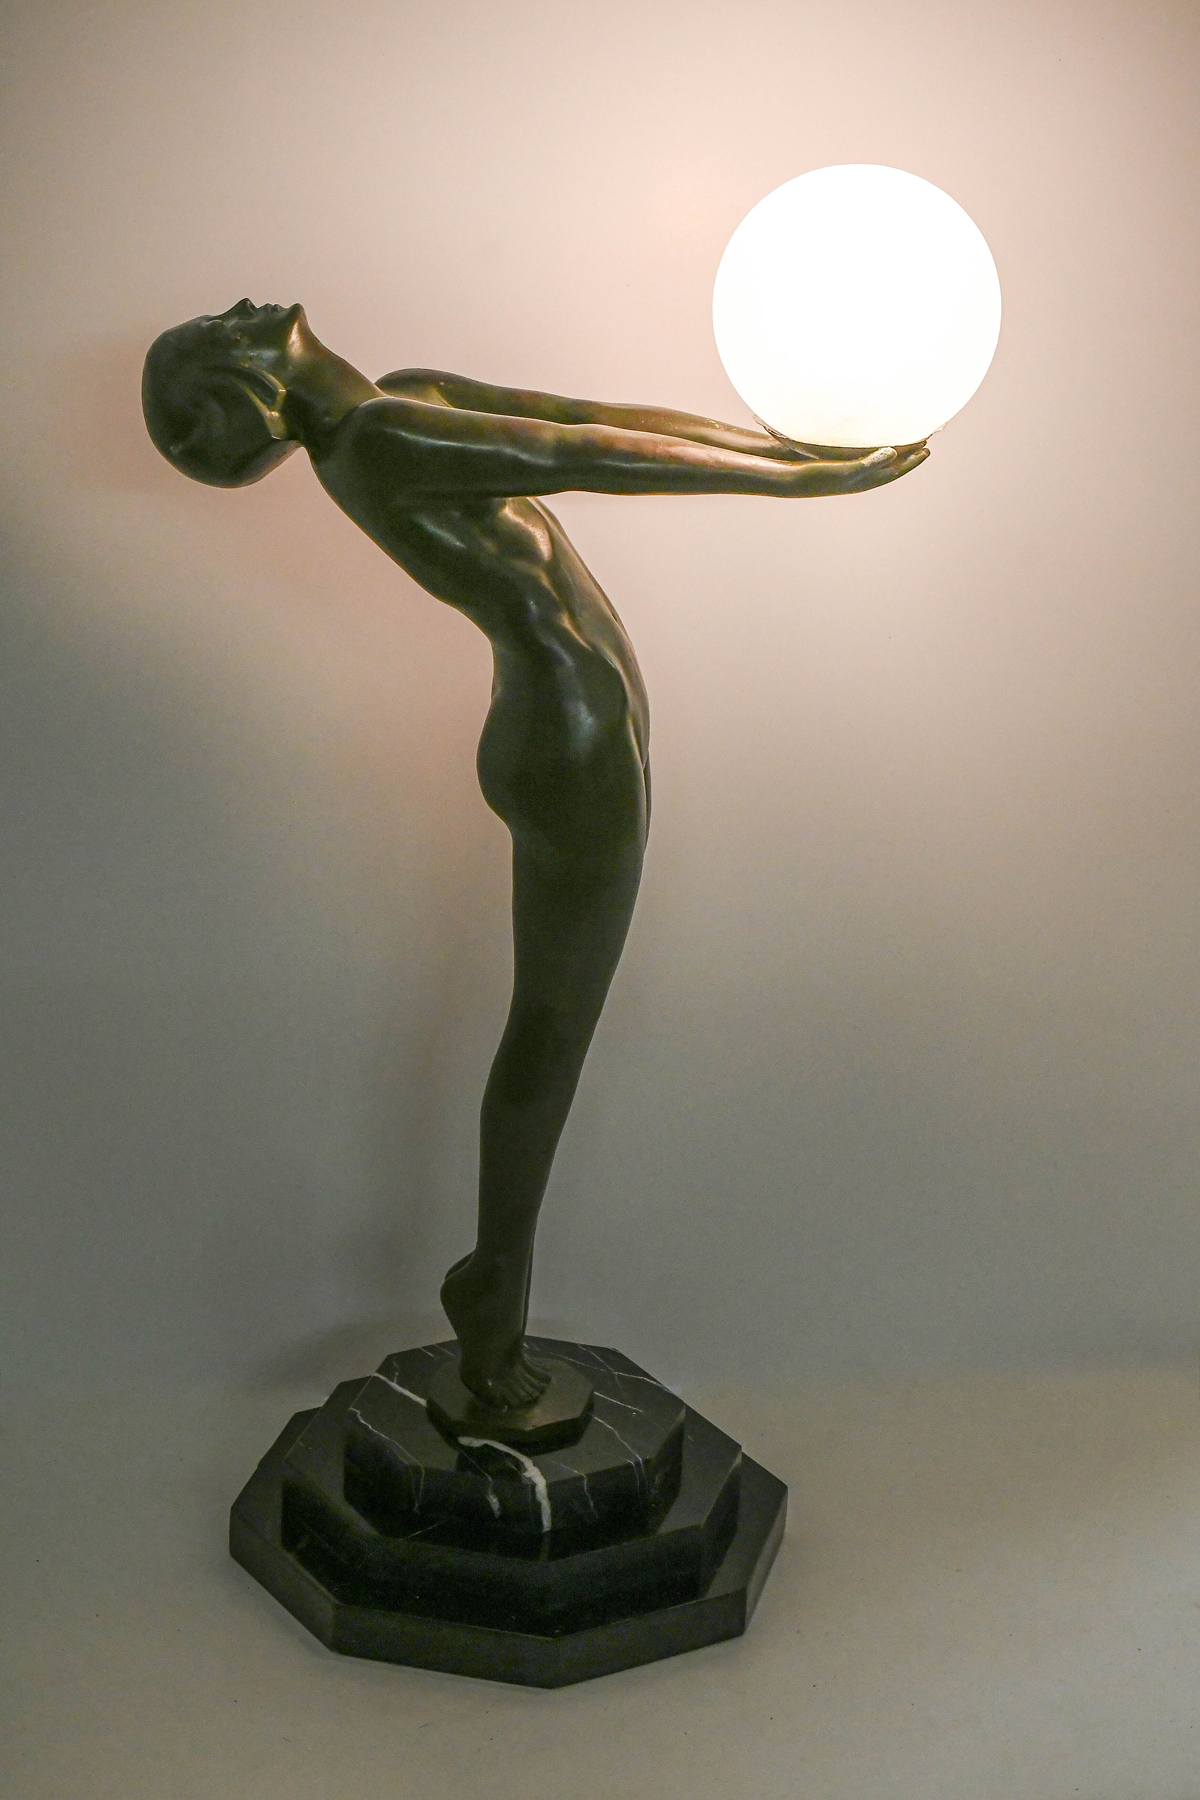 ART DECO STYLE NUDE LAMP WITH BALL 36a53b